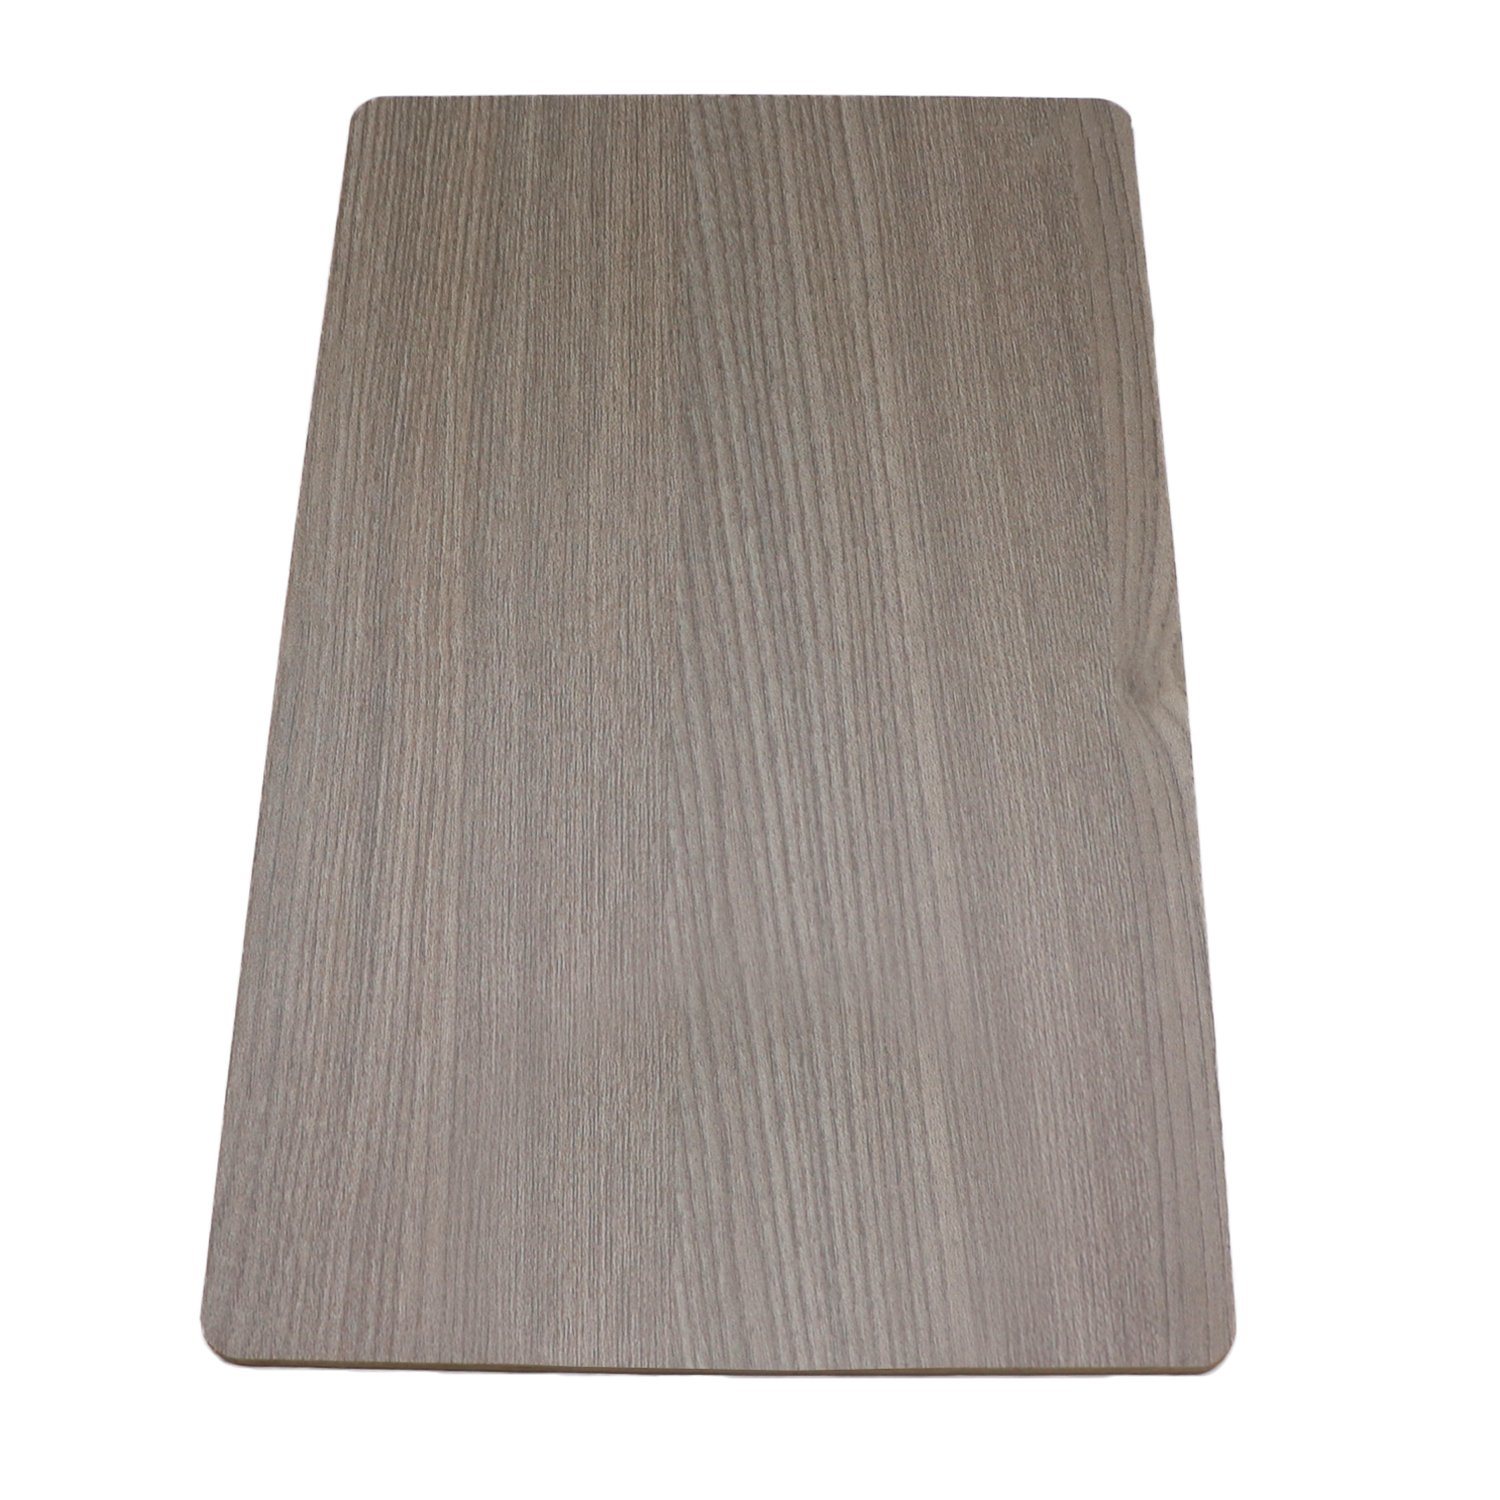 China Top Grade Melamine Woodgrain Paper Faced Plywood Board for Furniture